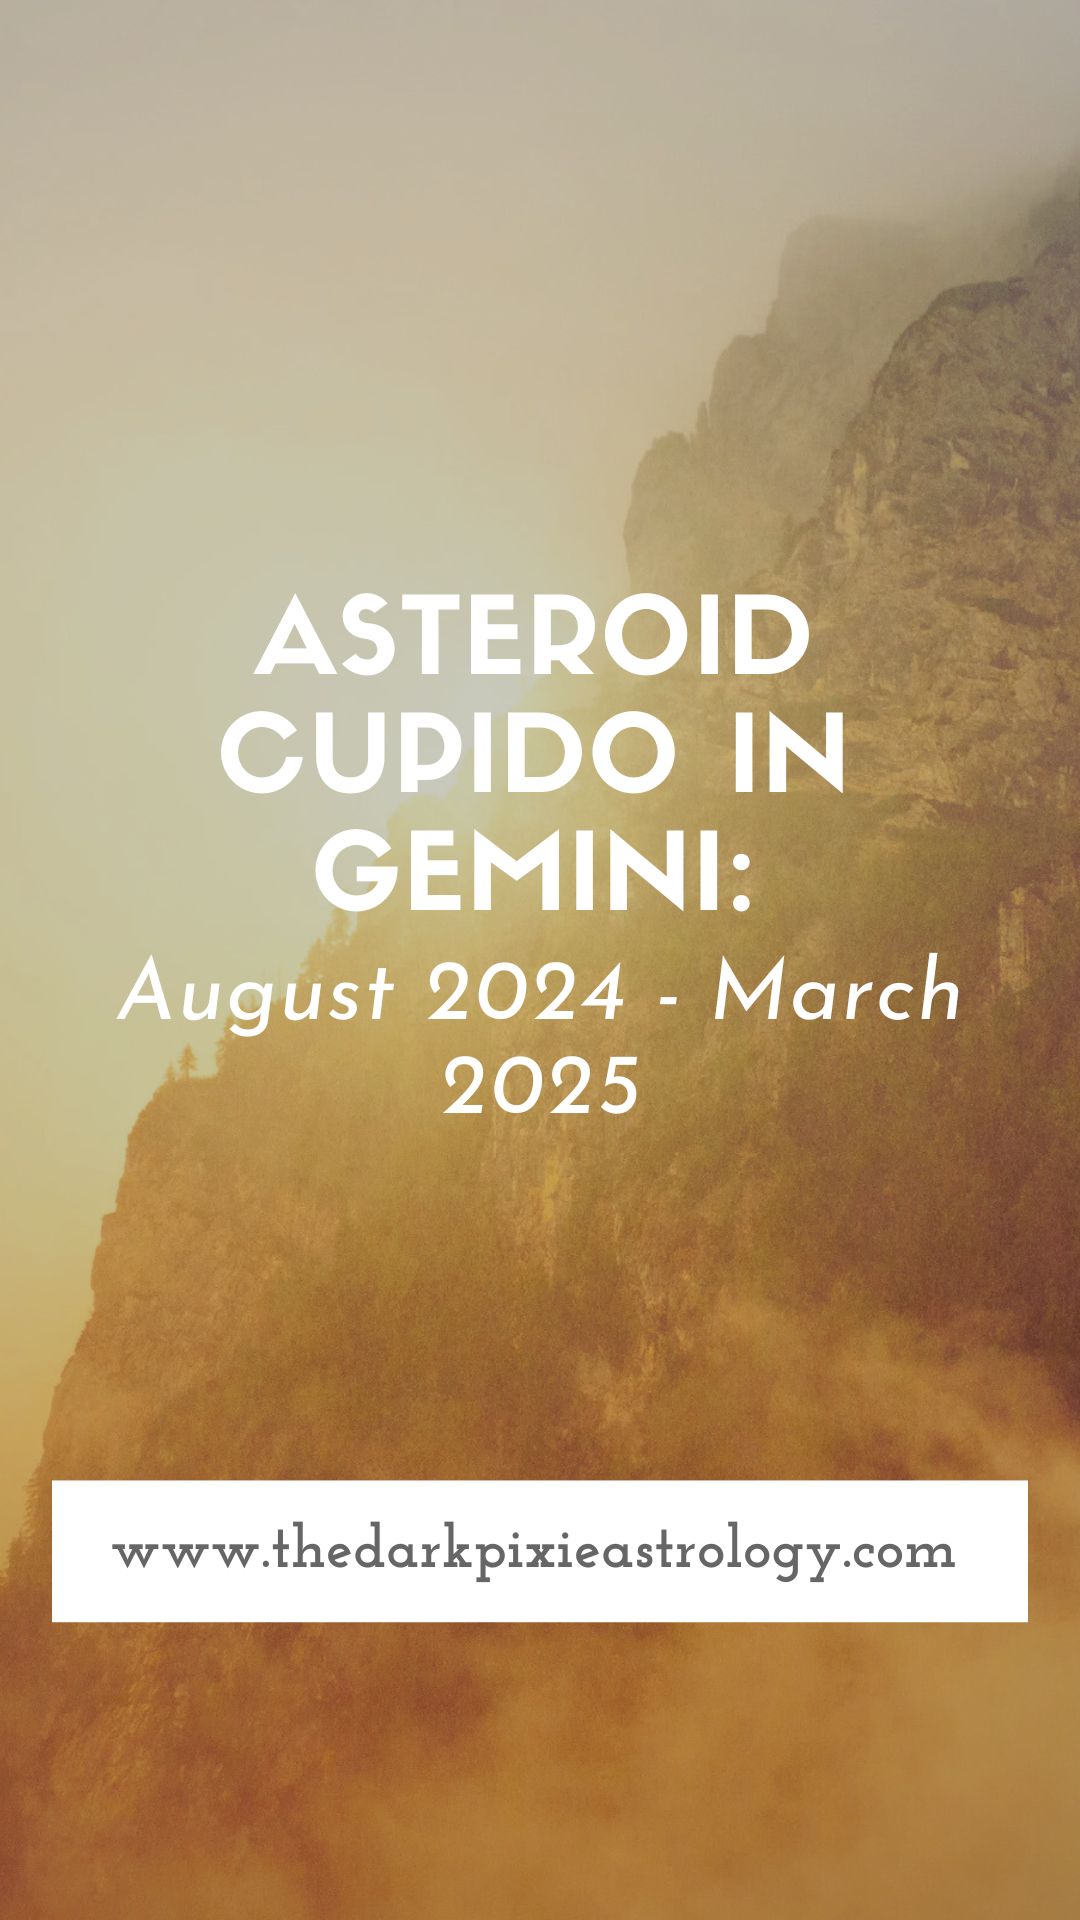 Asteroid Cupido in Gemini: August 2024 - March 2025 - The Dark Pixie Astrology